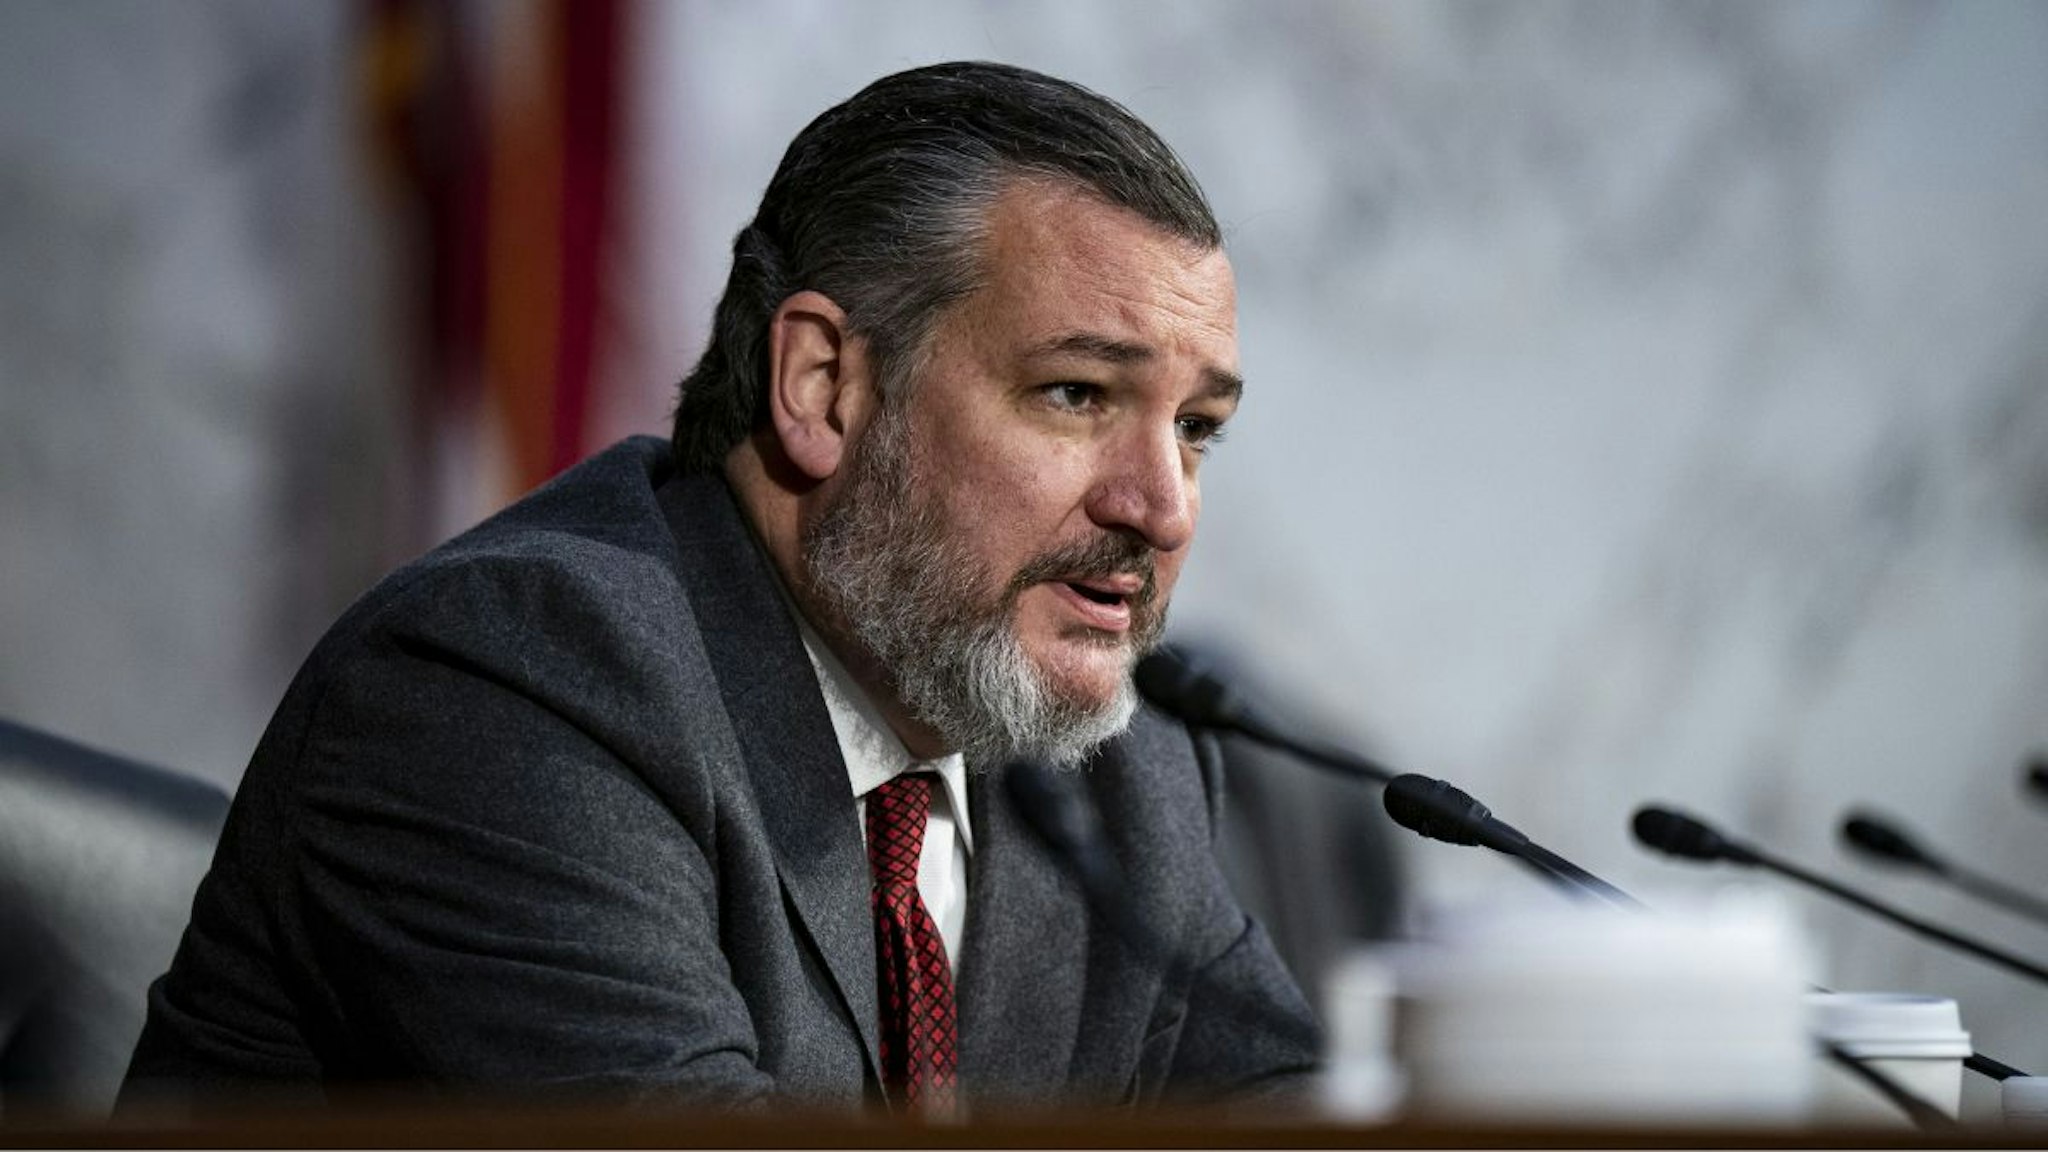 Senator Ted Cruz, a Republican from Texas, speaks during a Senate Judiciary Committee hearing in Washington, DC, US, on Tuesday, Jan. 24, 2023.